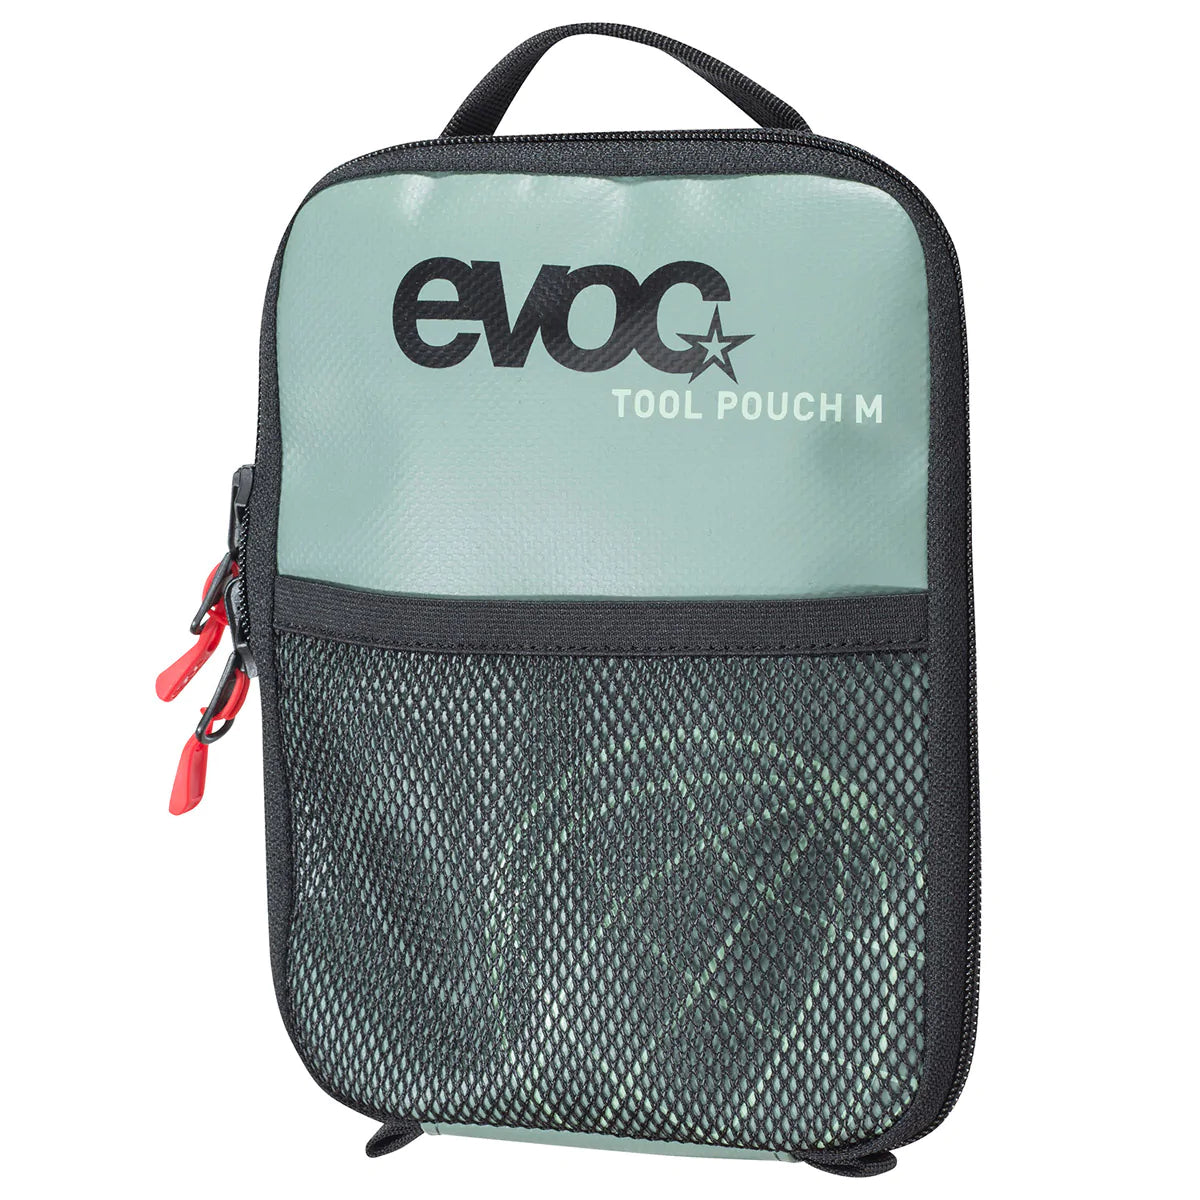 EVOC TOOL POUCH S 0.6 l